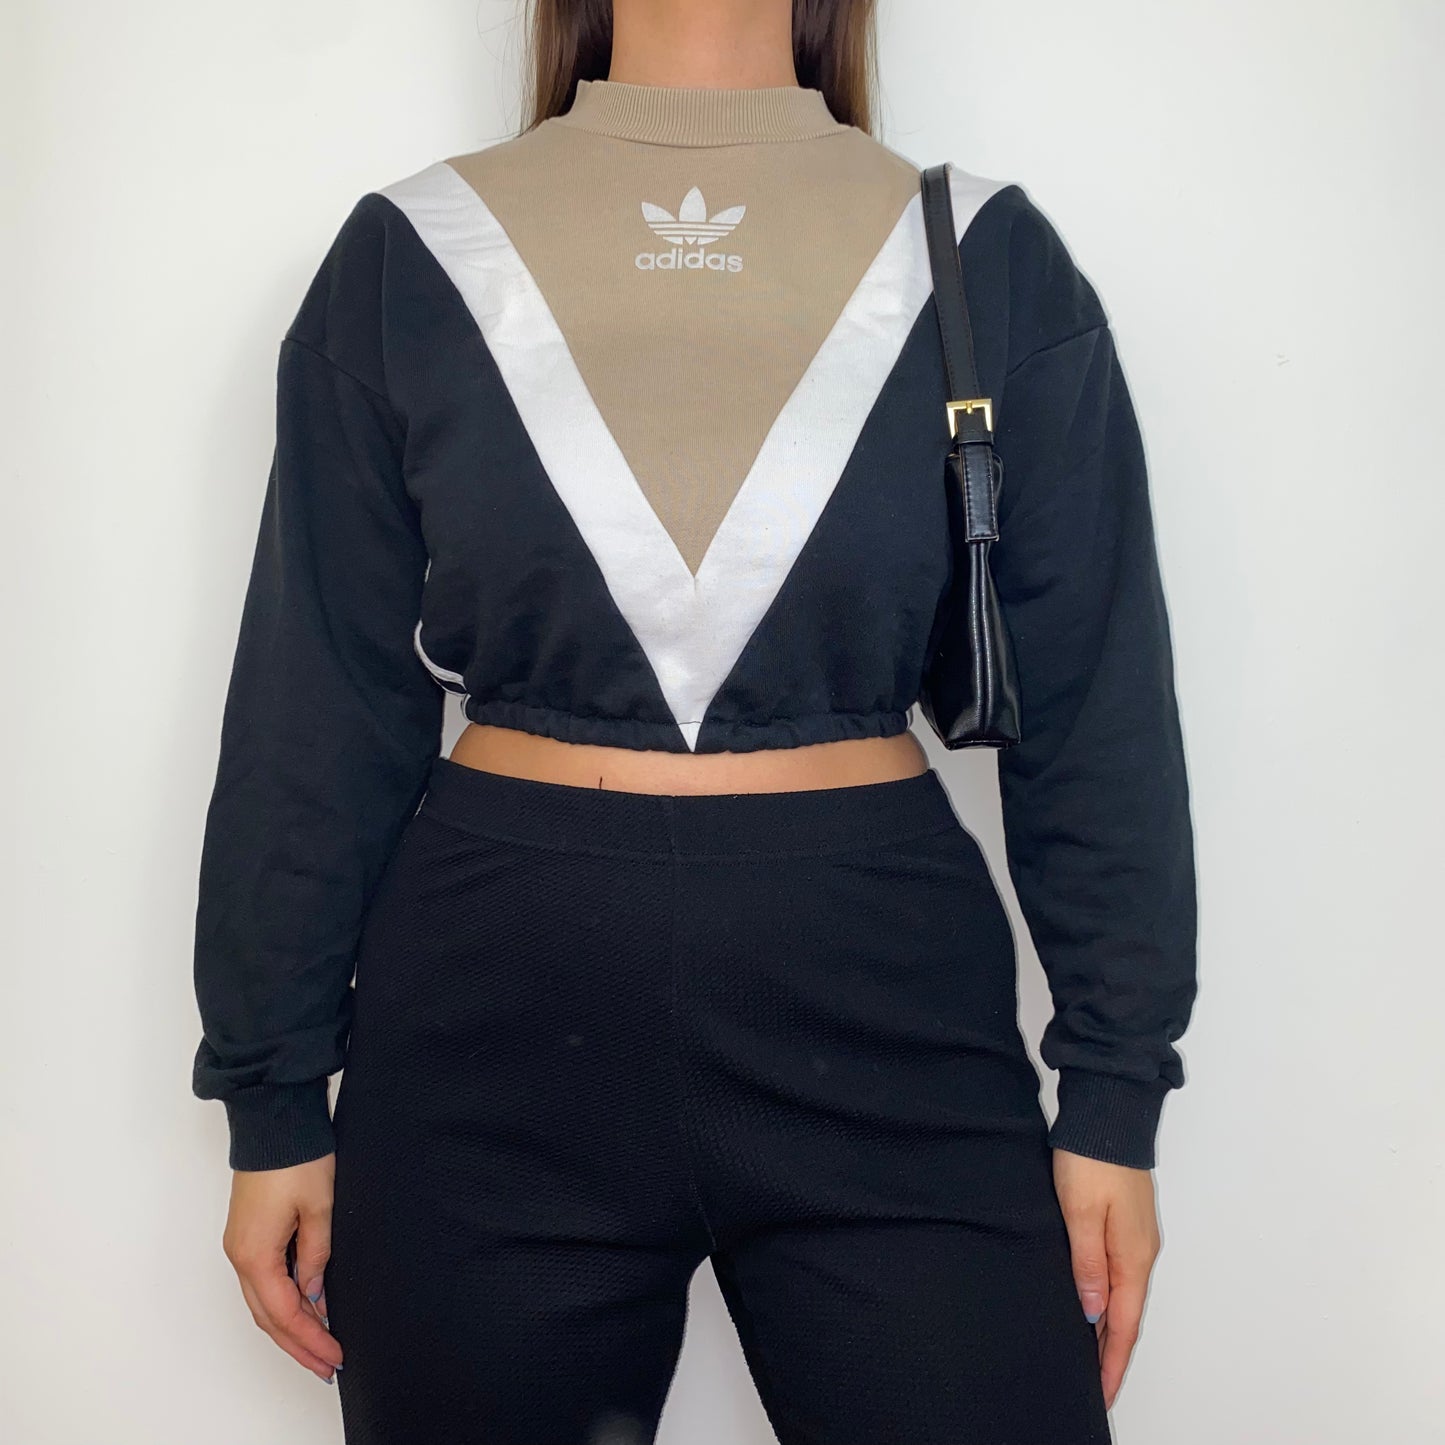 black and beige cropped hoodie with white adidas logo shown on a model wearing black trousers and a black shoulder bag